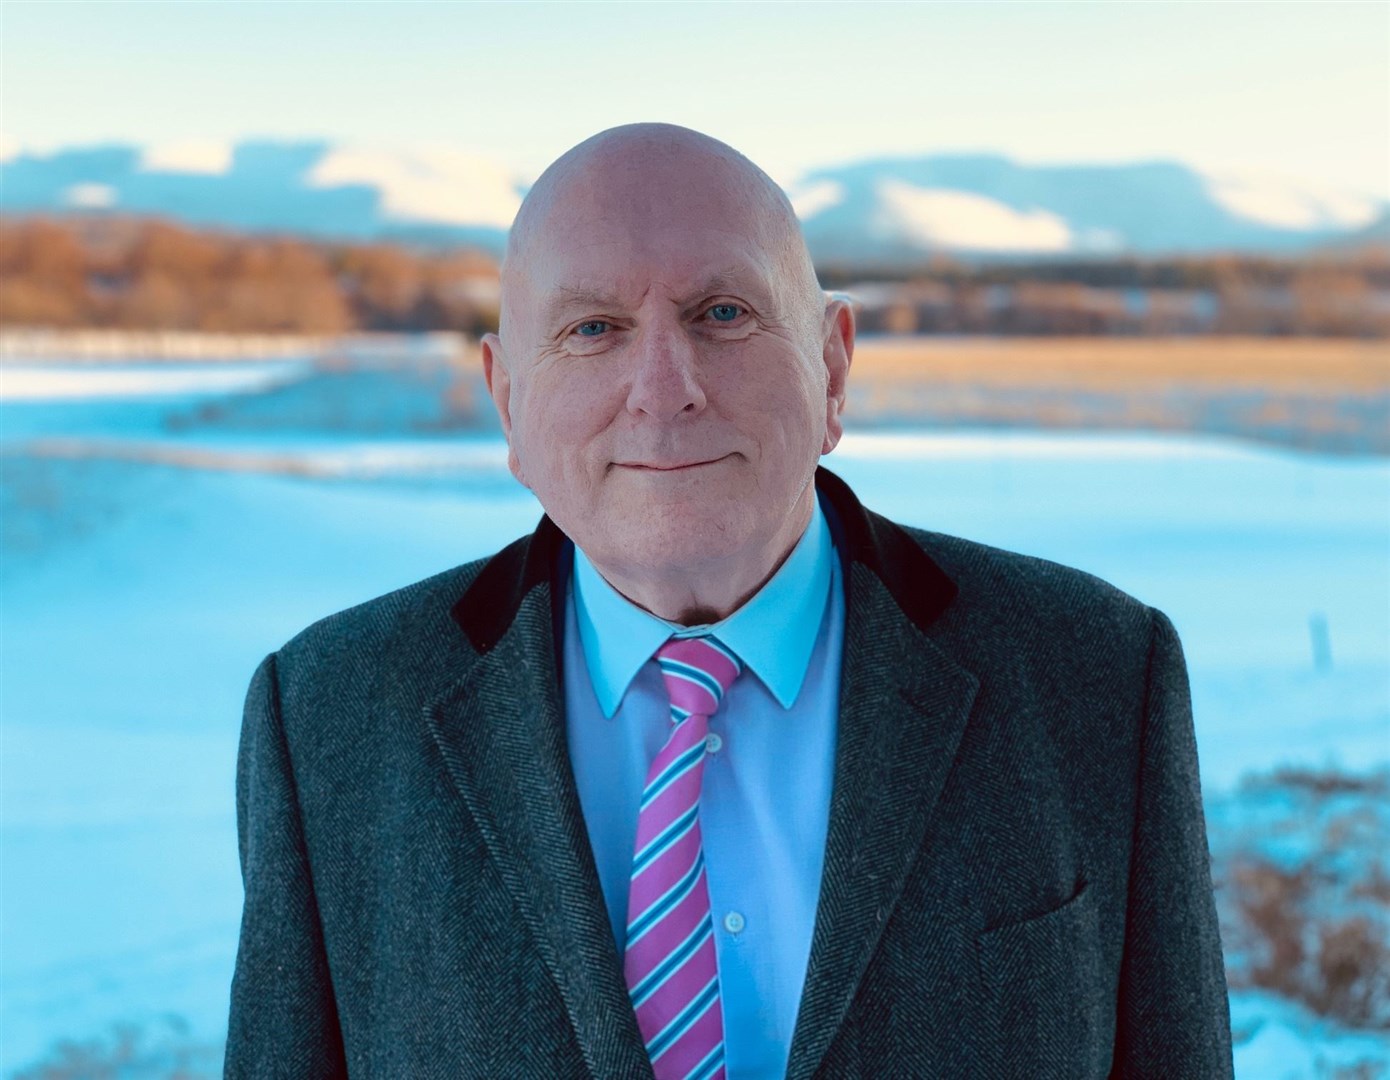 The Brexit Party's Les Durance, who will now be standing in the Inverness, Nairn, Badenoch and Strathspey constituency.